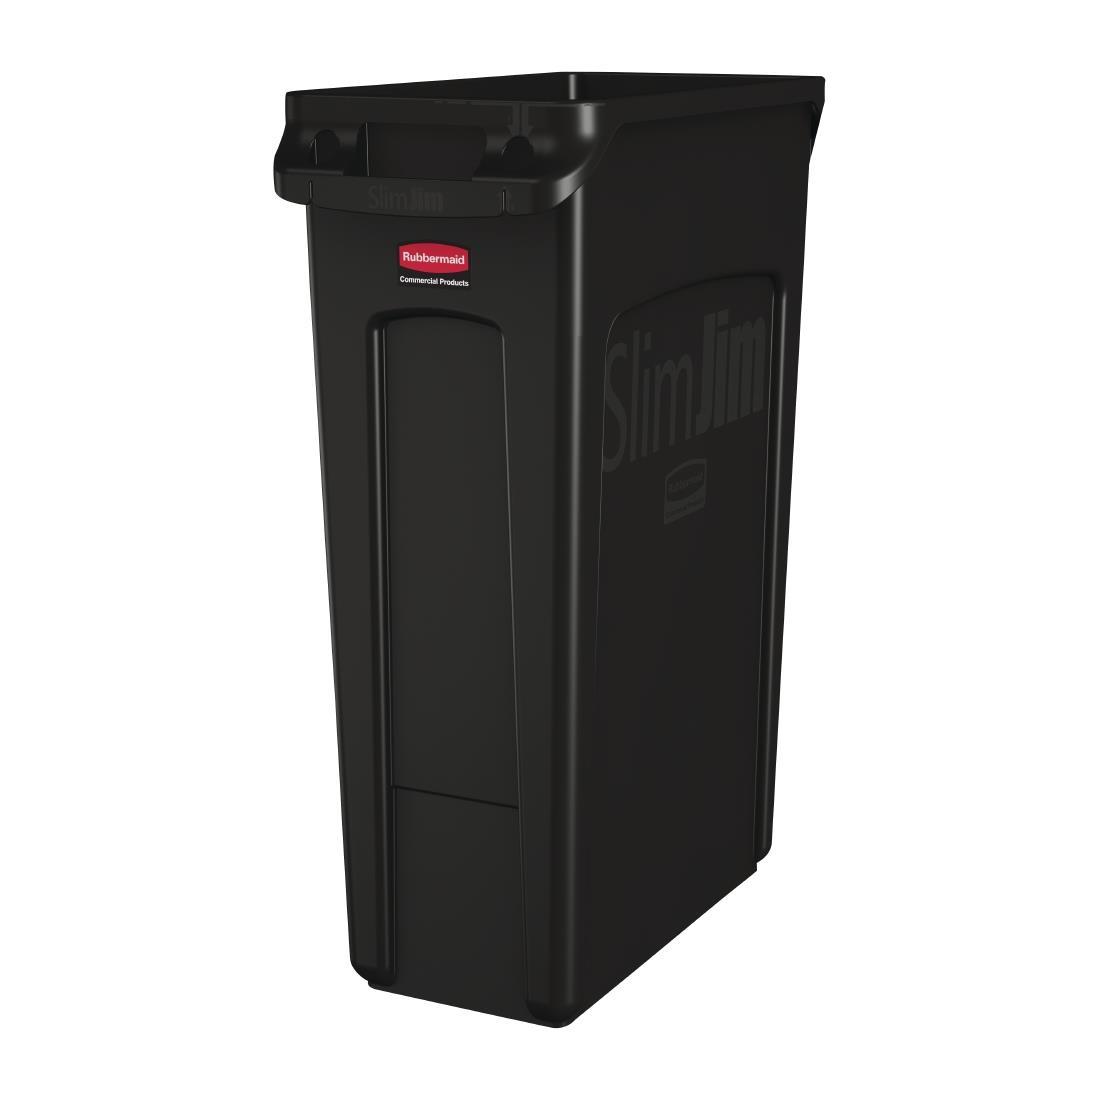 Rubbermaid Slim Jim Container With Venting Channels Black 87Ltr - CP653  - 1